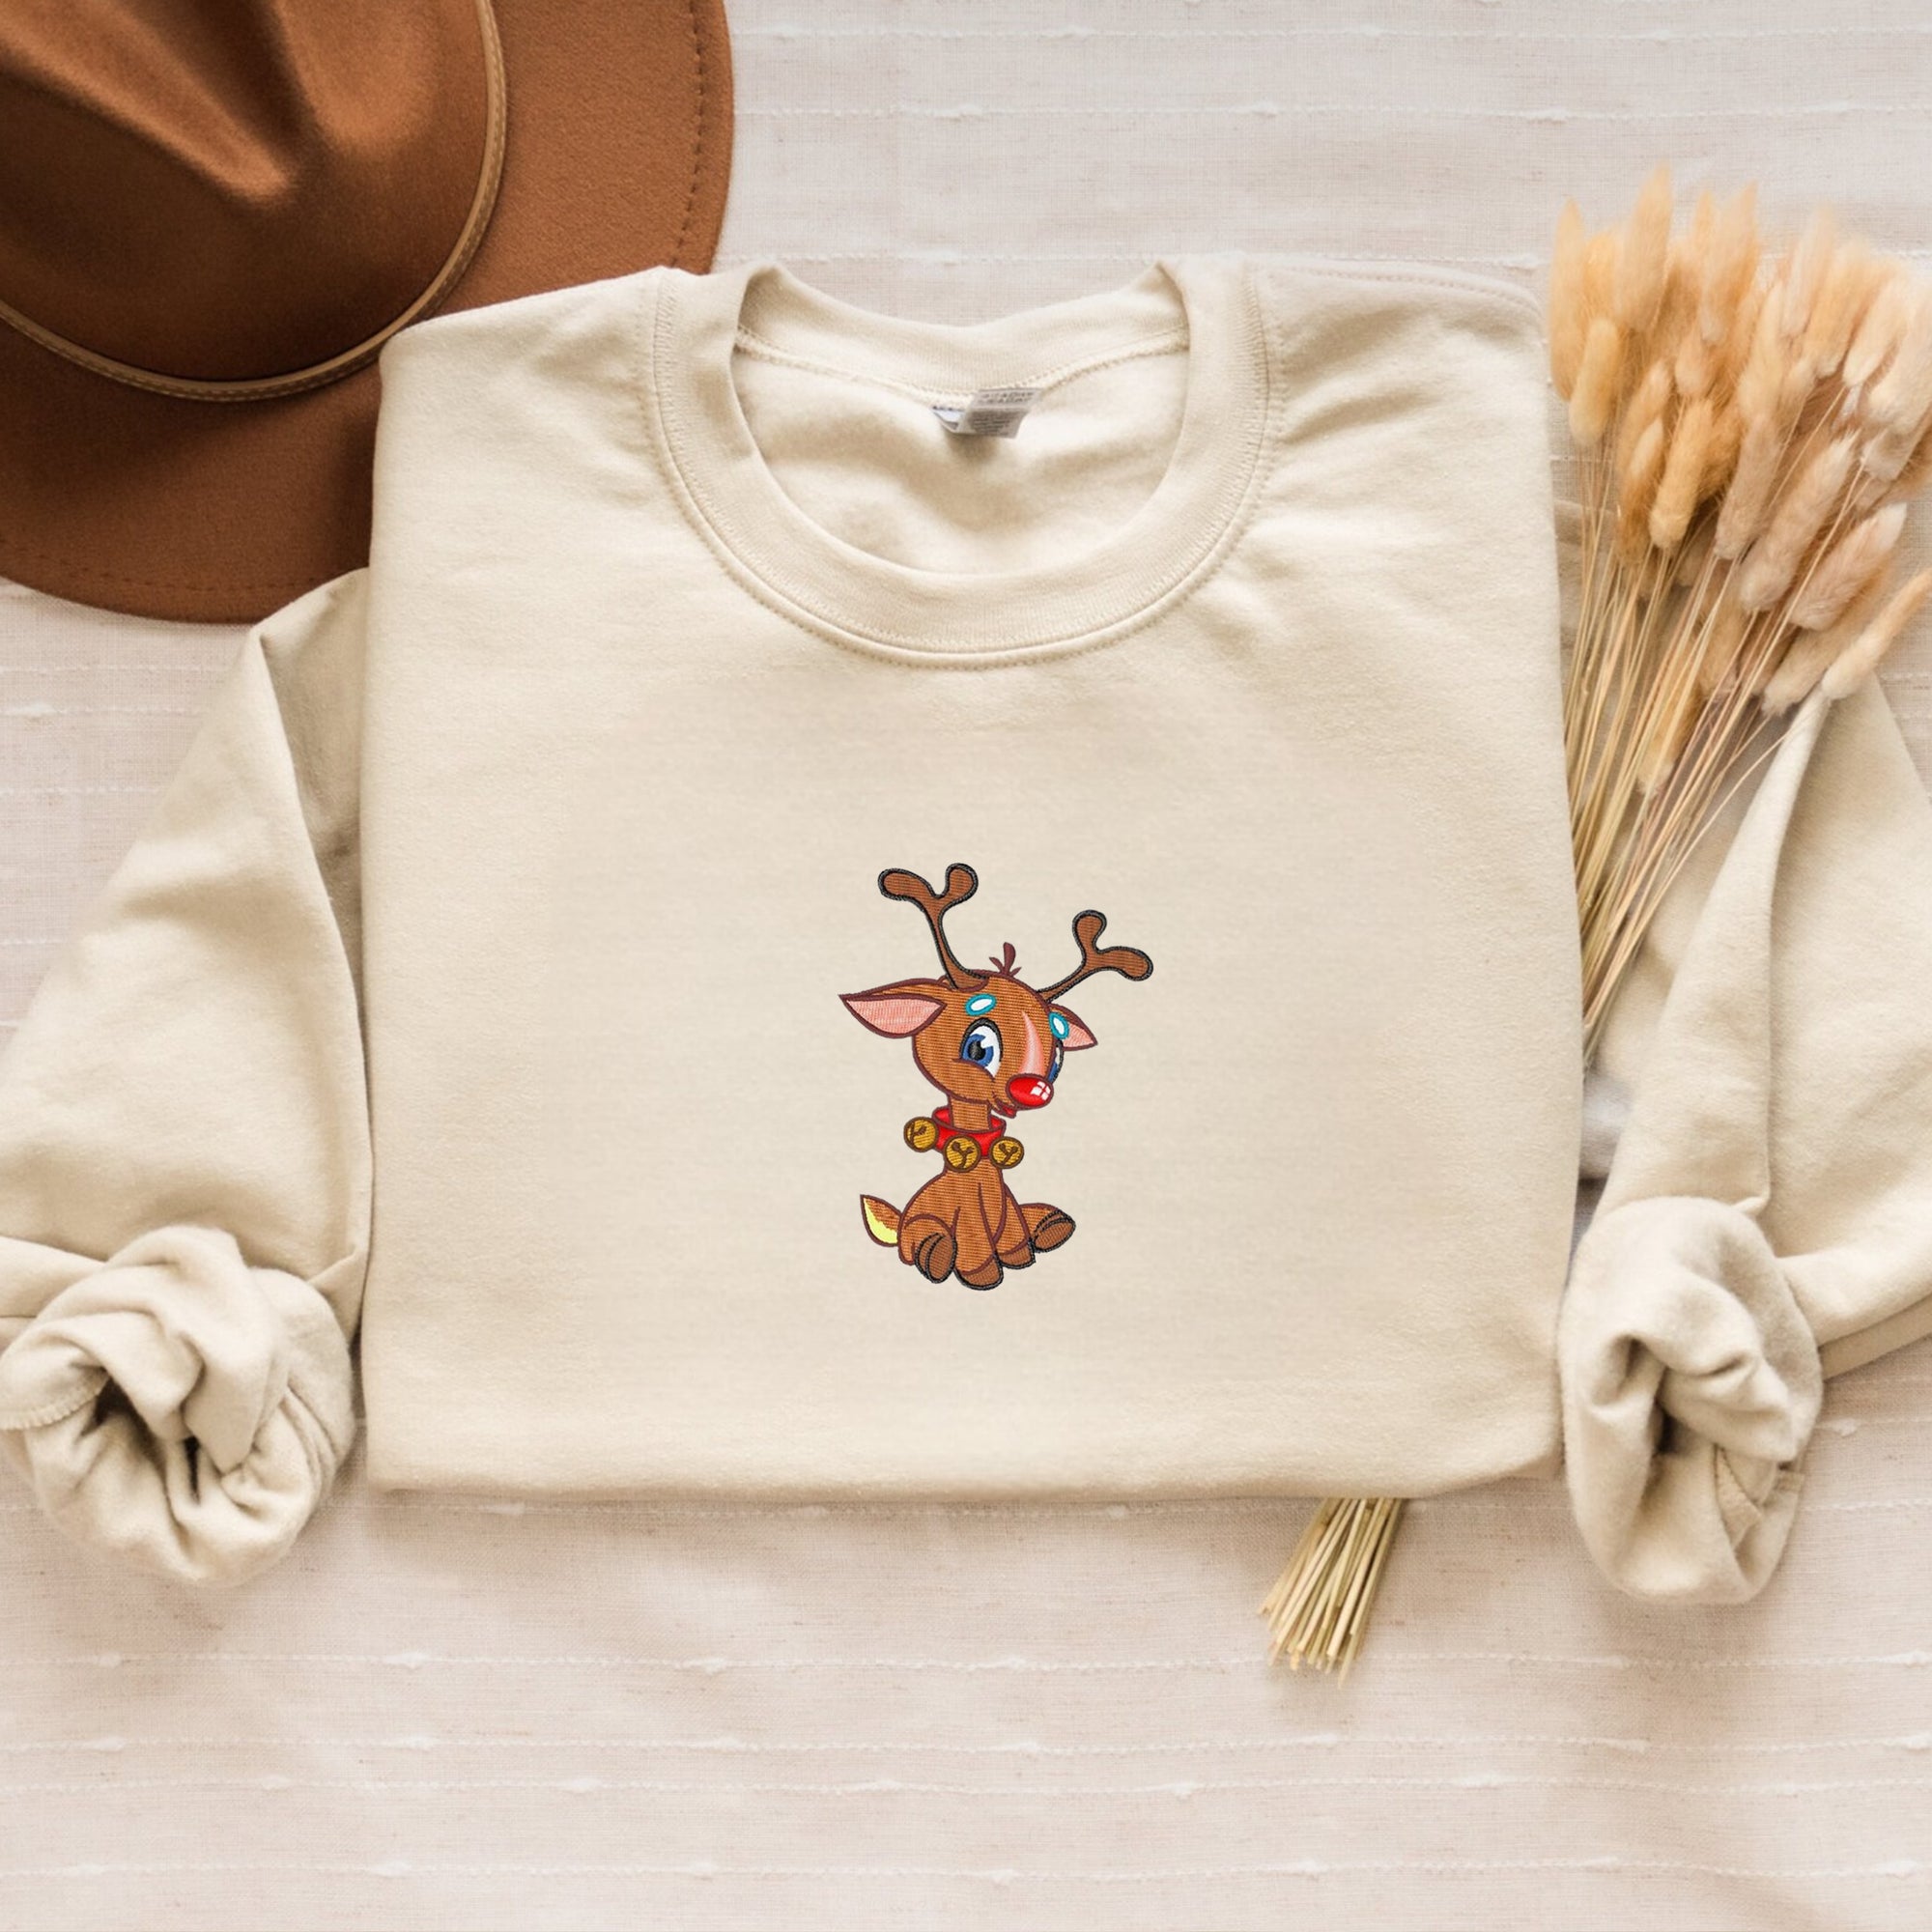 Top-selling Item] Classic Rudolph and Santa Embroidered Sweatshirt